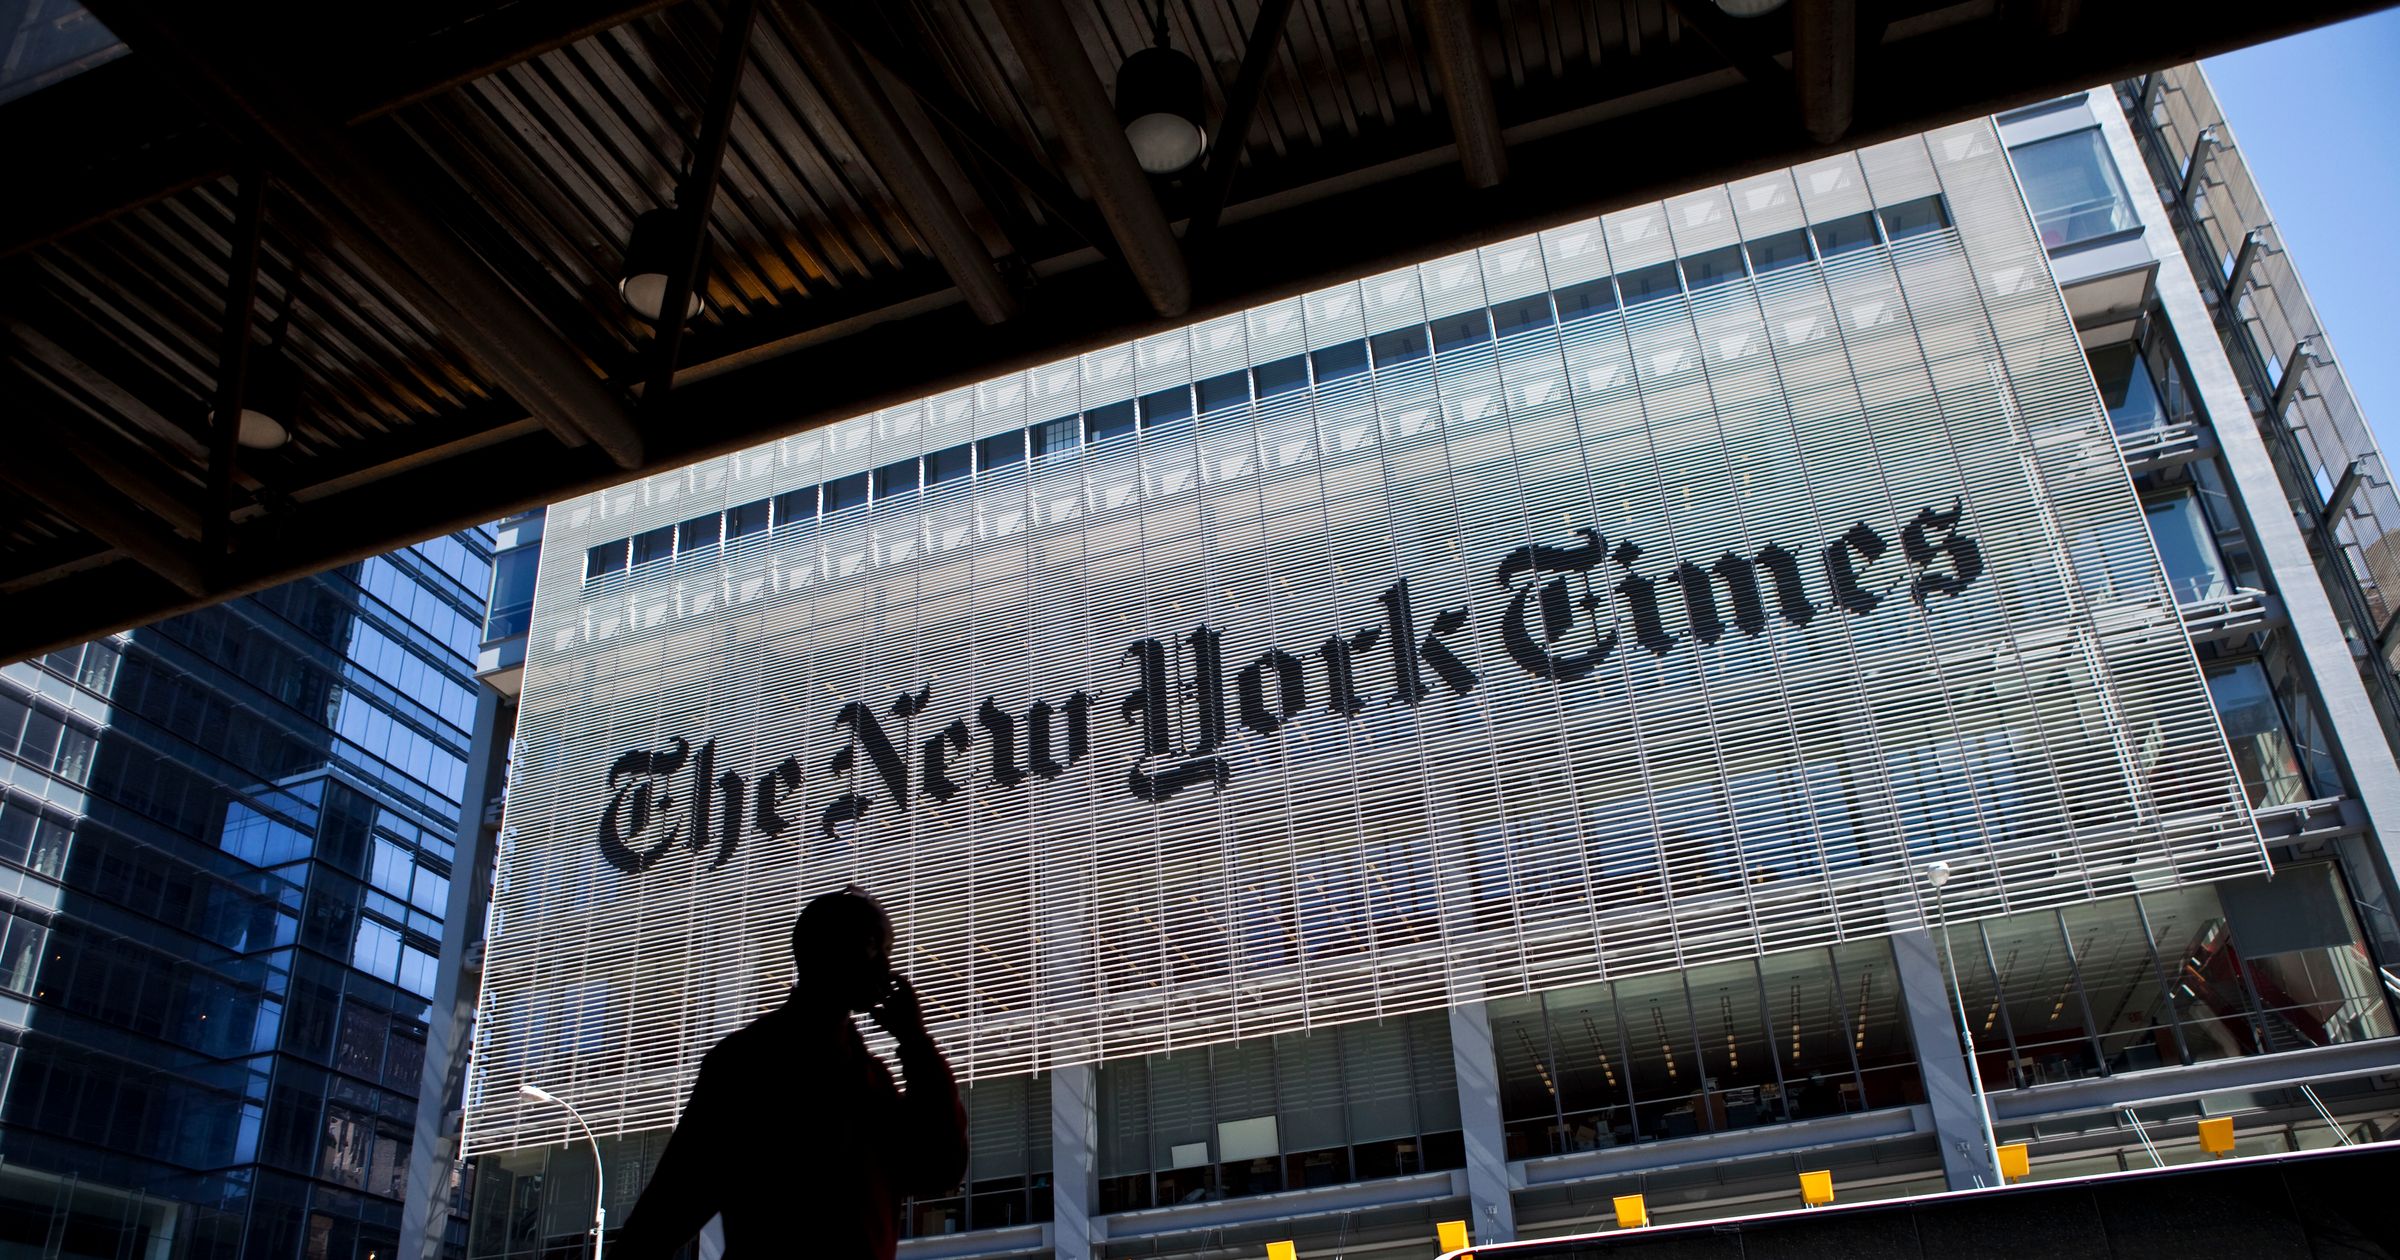 ny times supportedreaders not advertisers  nymag